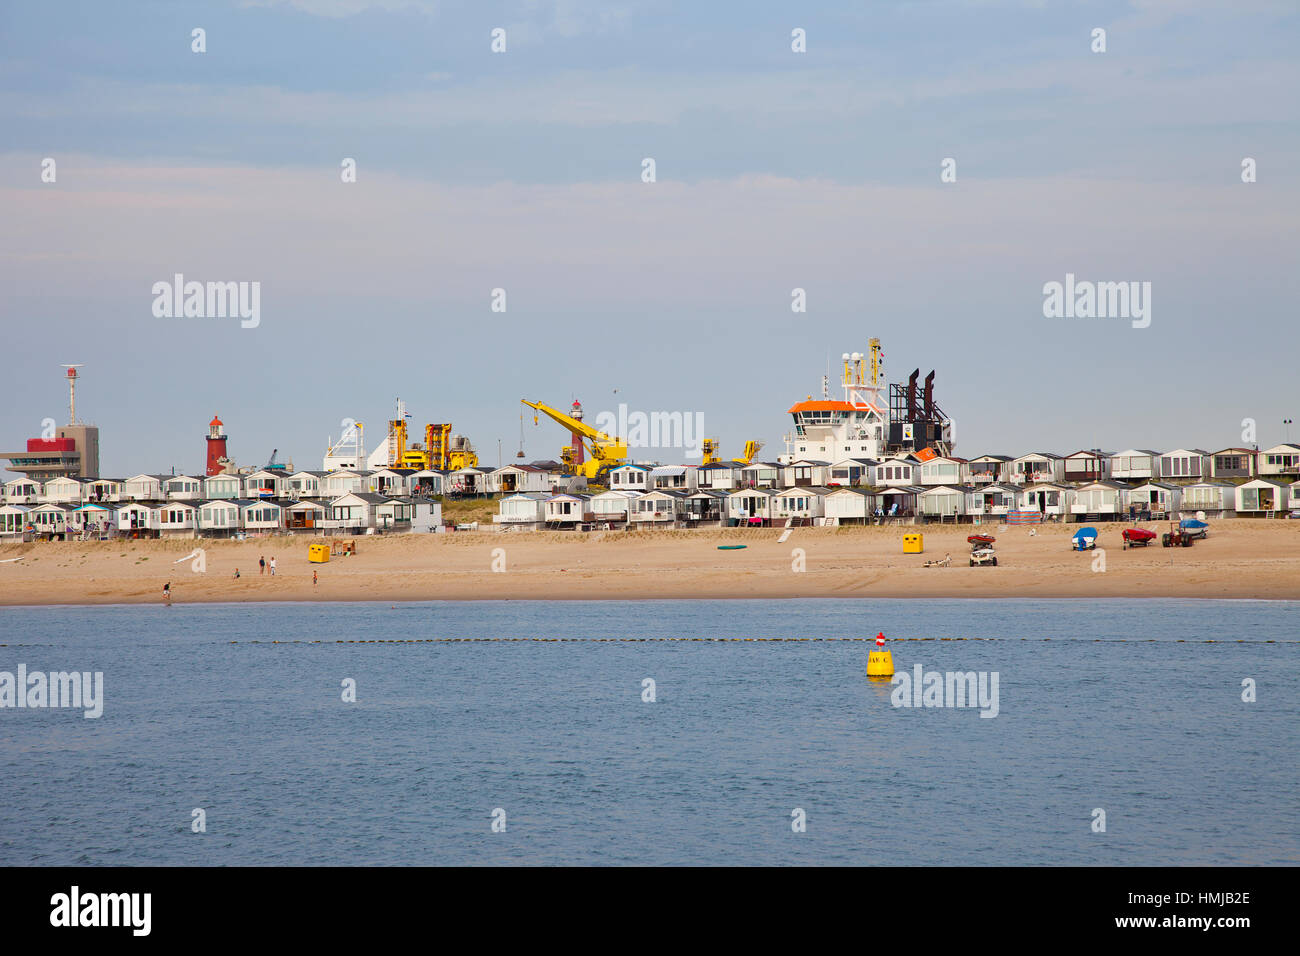 VELSEN, THE NETHERLANDS - July 7, 2014: View at typical beach houses in Velsen, The Netherlands Stock Photo